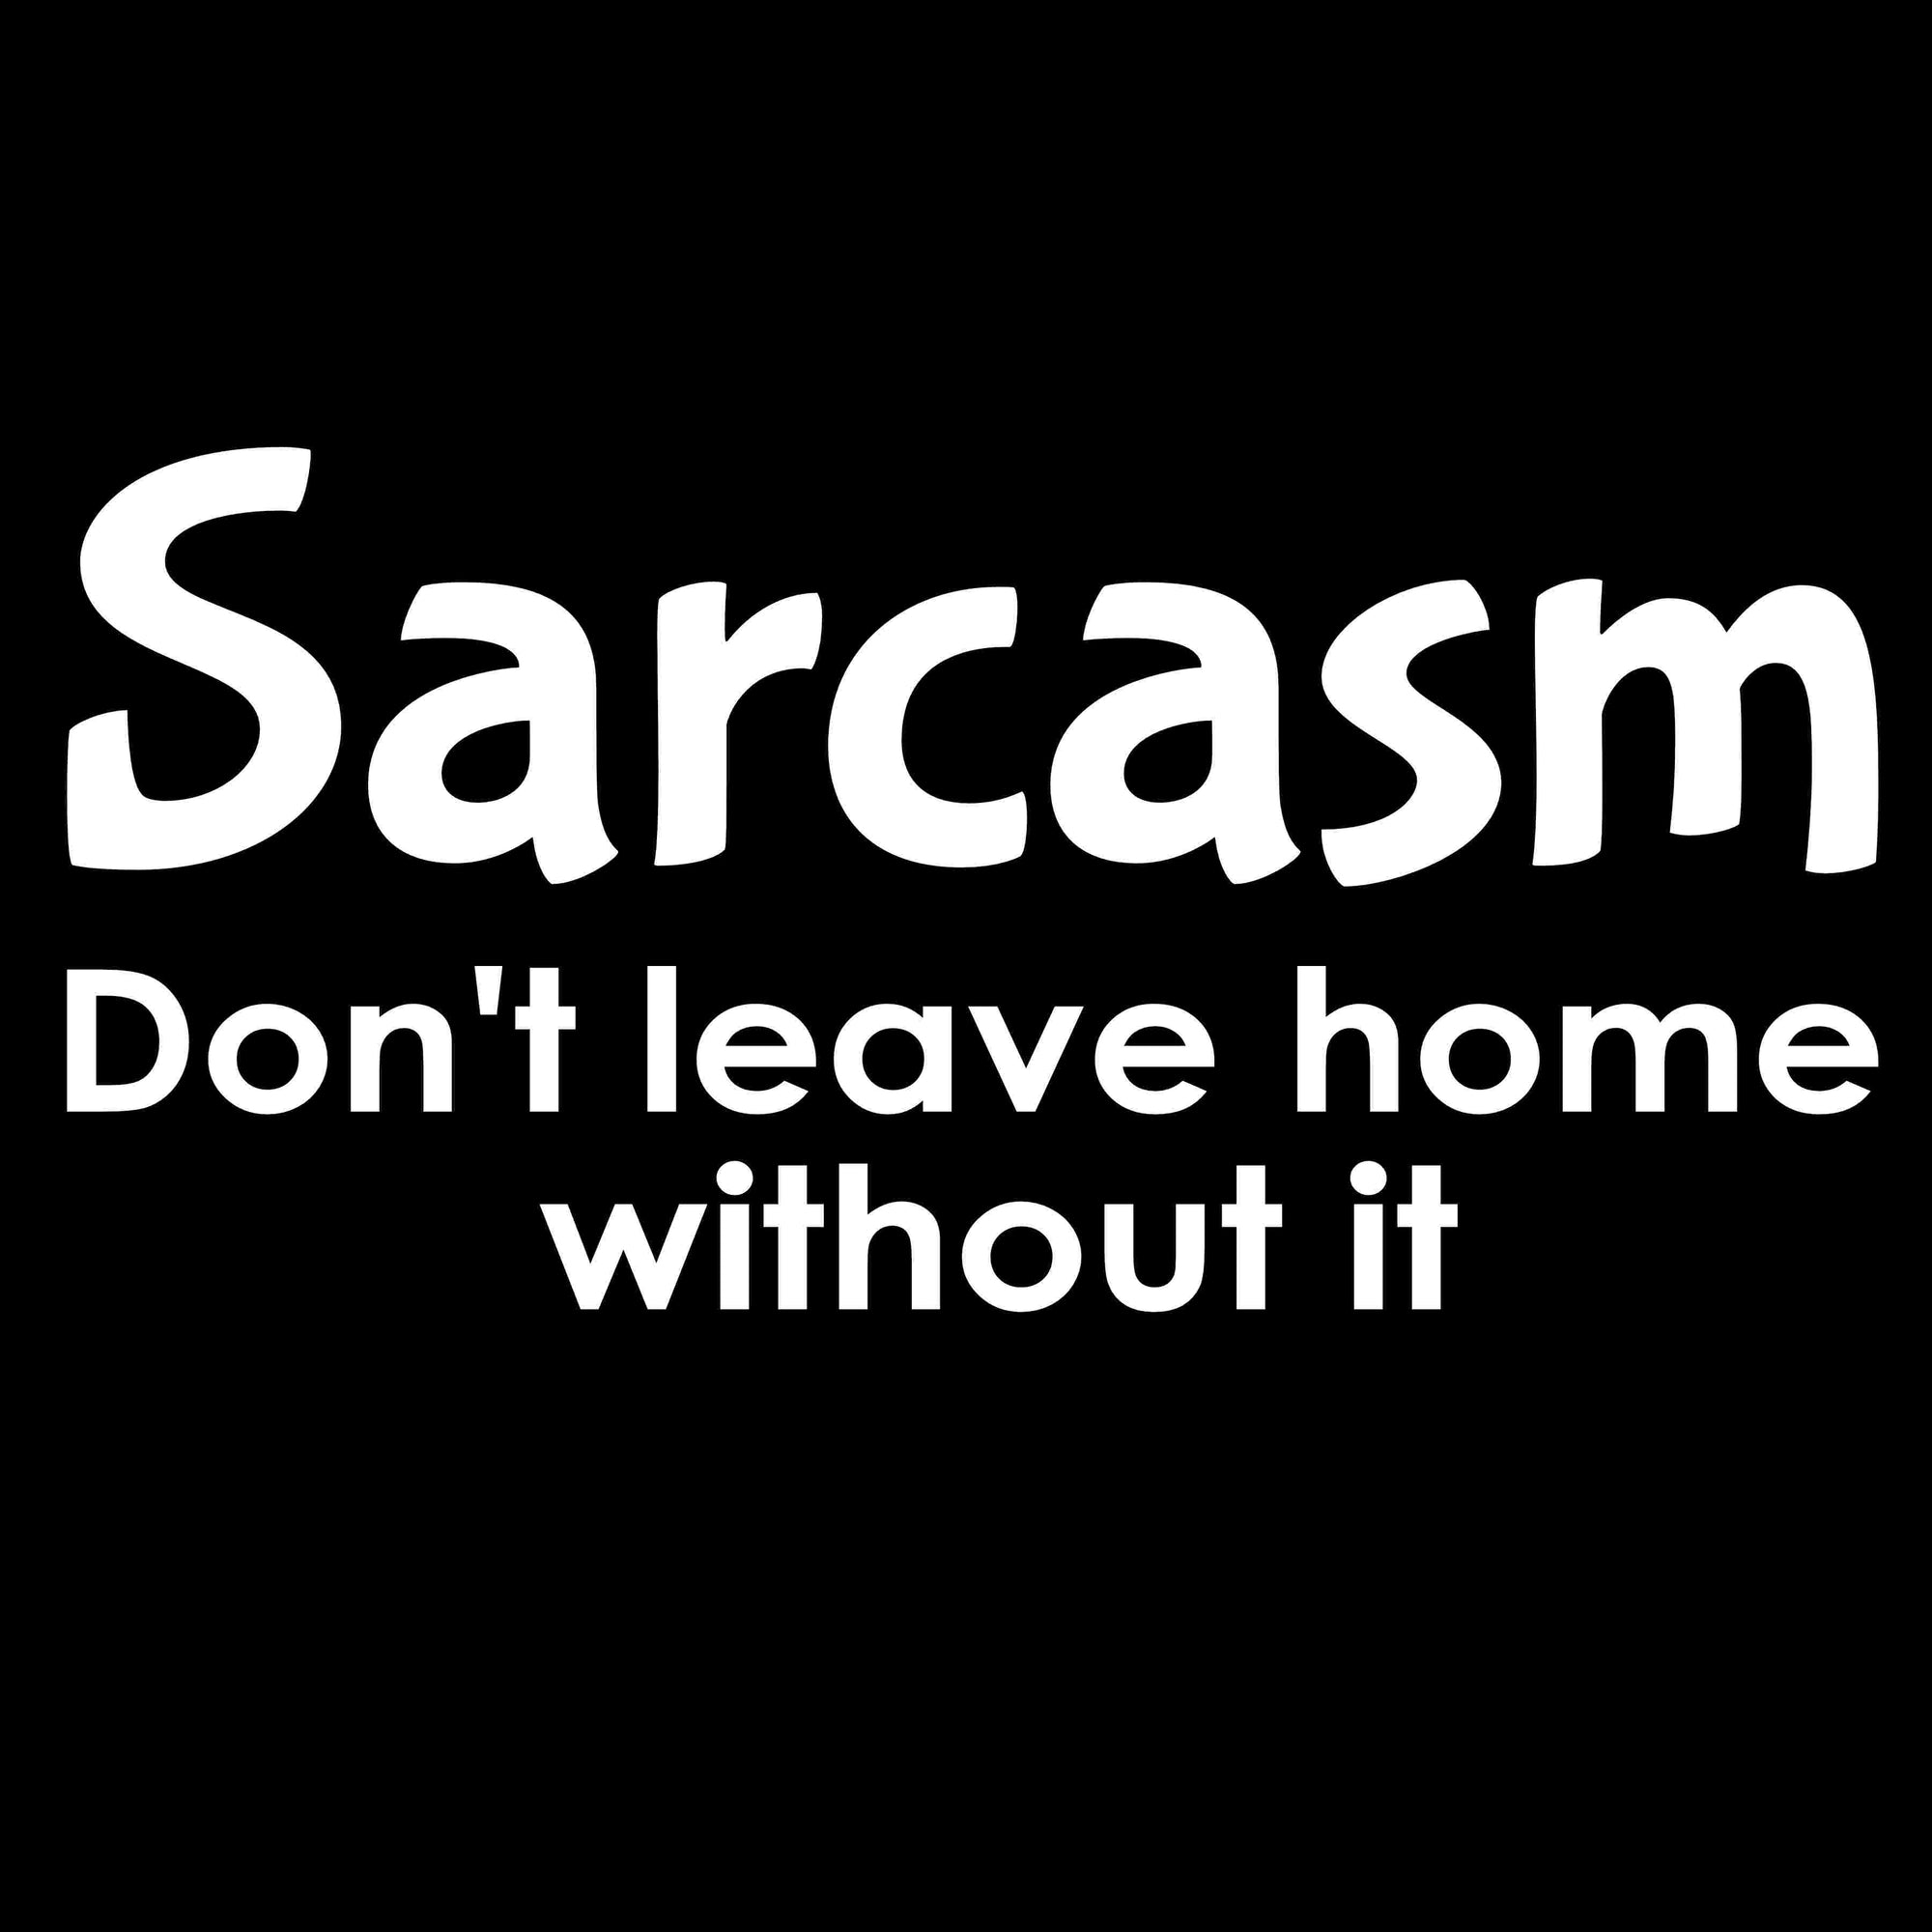 Sarcasm Don't Leave Home With Out Printed T-Shirt Tall